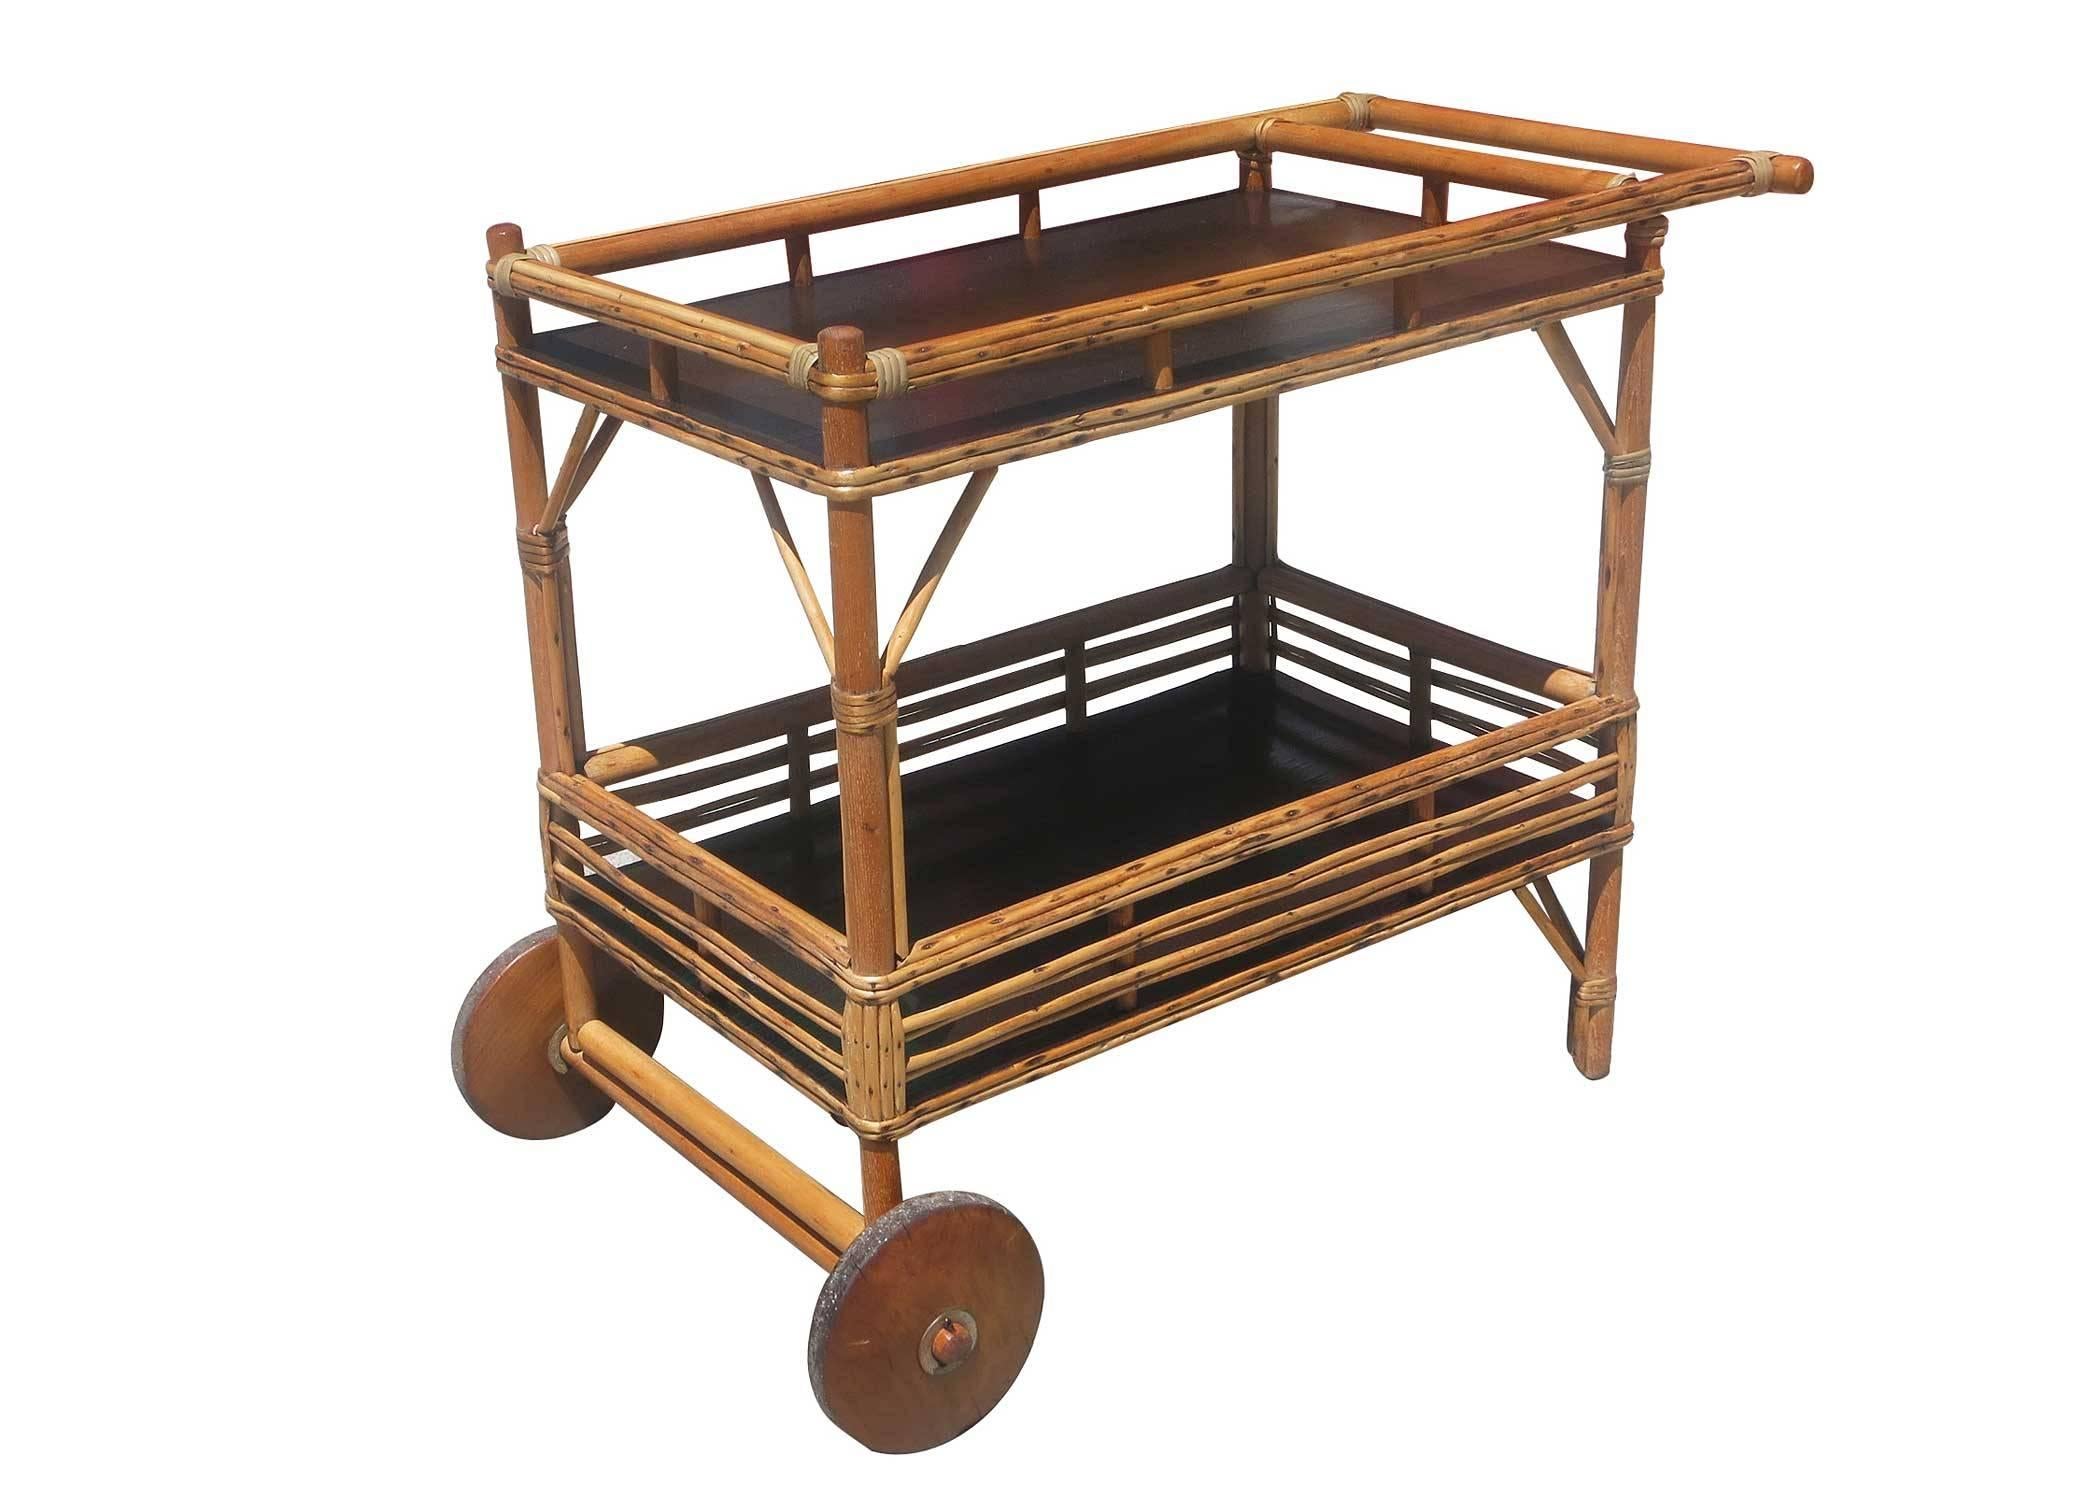 This unique 1940s bar cart features a minimal circular frame with two shelves in mahogany and a removable serving tray on top.

Refinished to new for you.

All rattan, bamboo and wicker furniture has been painstakingly refurbished to the highest